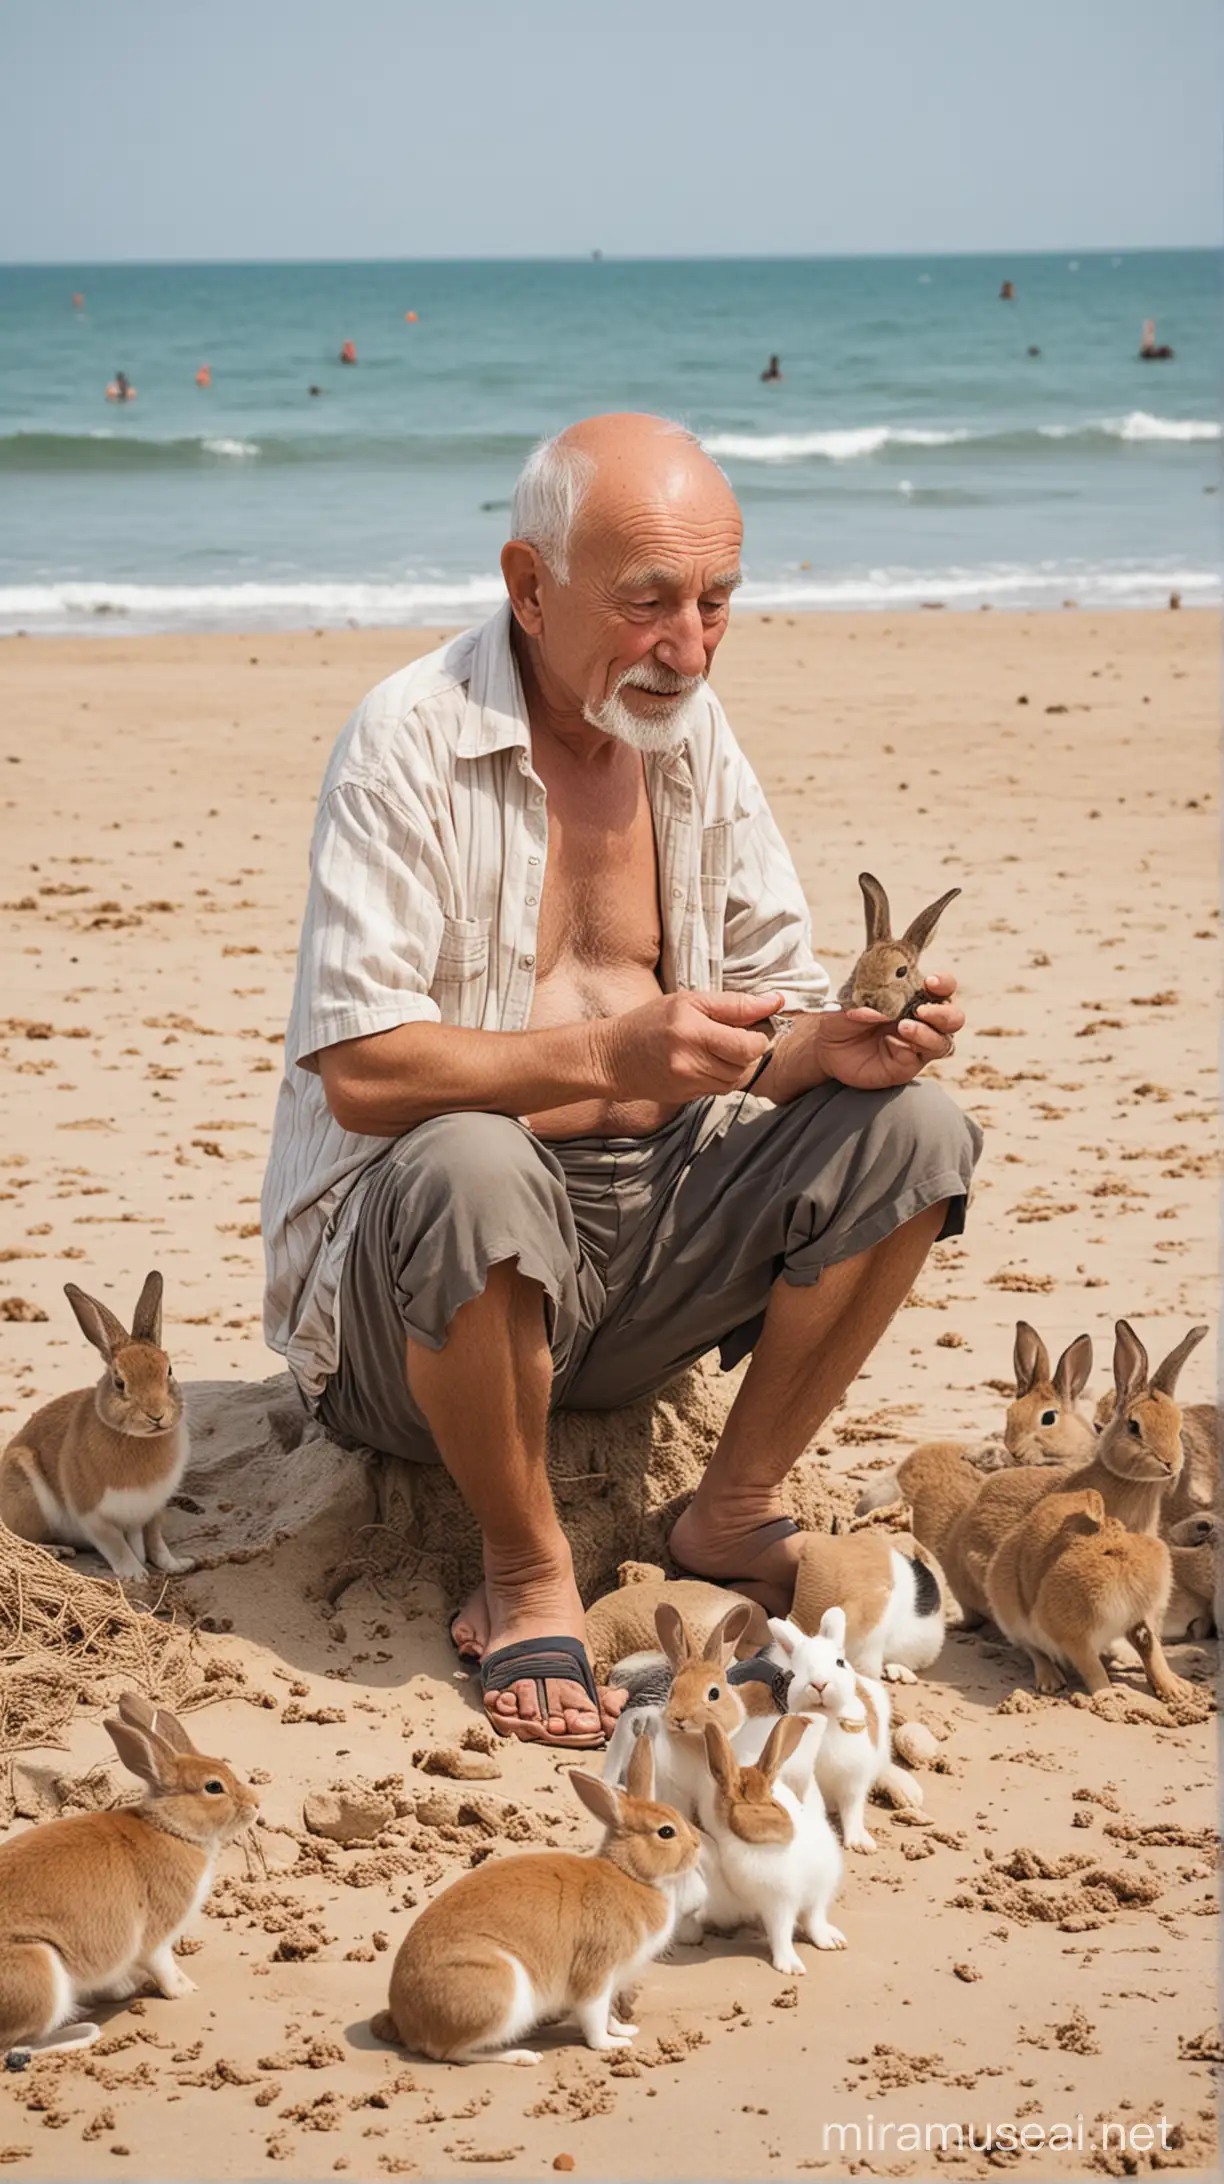 An old man sitting in beach playing with some rabbits